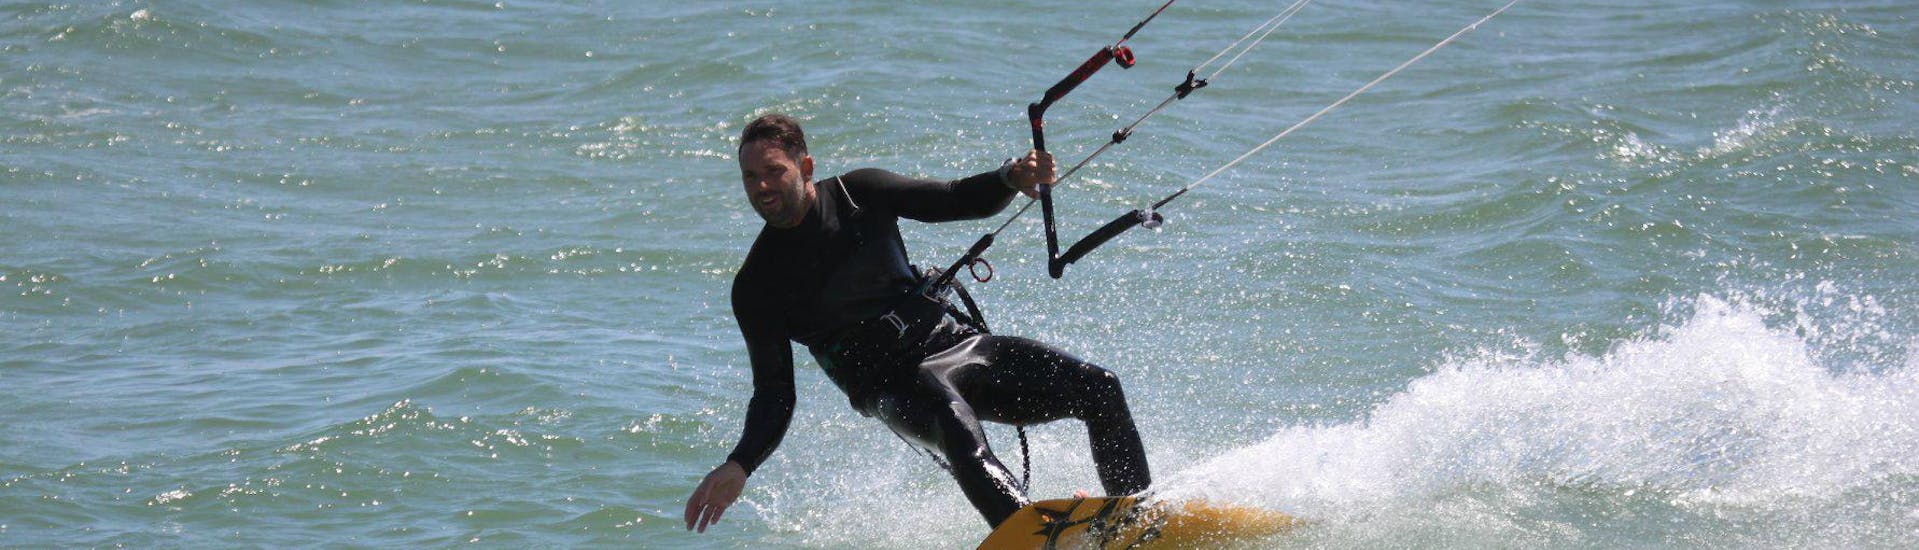 Private Kitesurfing Lessons (from 7 y.) at Lister Ellenbogen with Kiteschule Sylt - Hero image